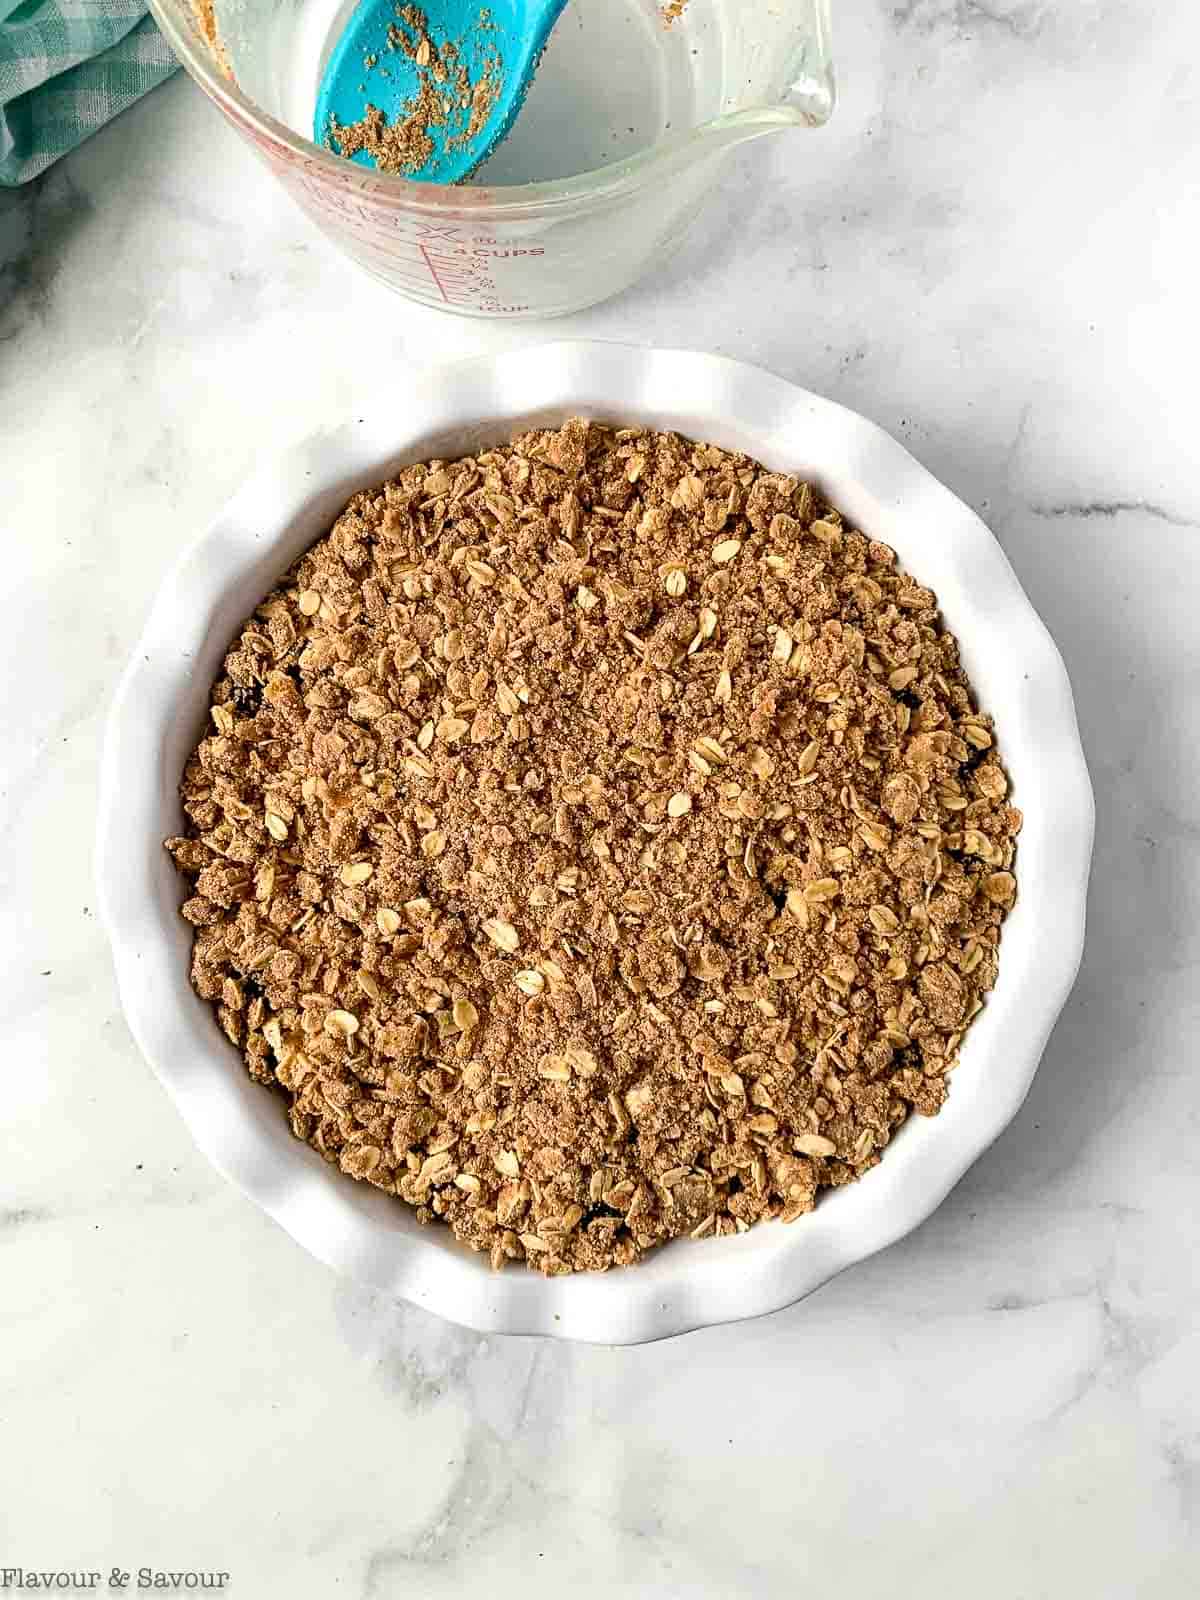 Baked cherry crisp in a round baking dish.